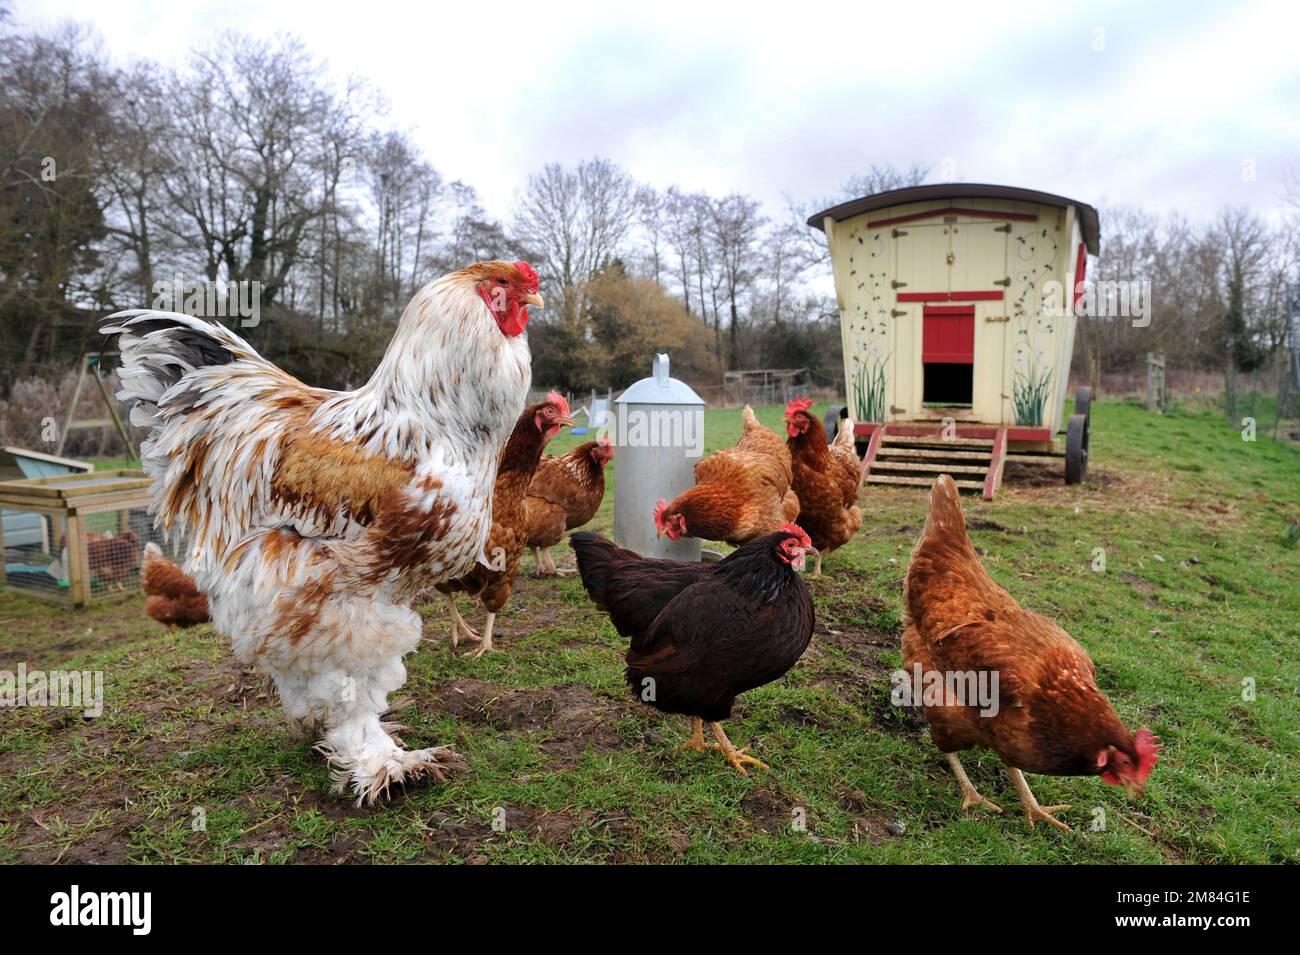 Free range chickens including the larger Brahma breed with a gypsy caravan style hen house. Stock Photo